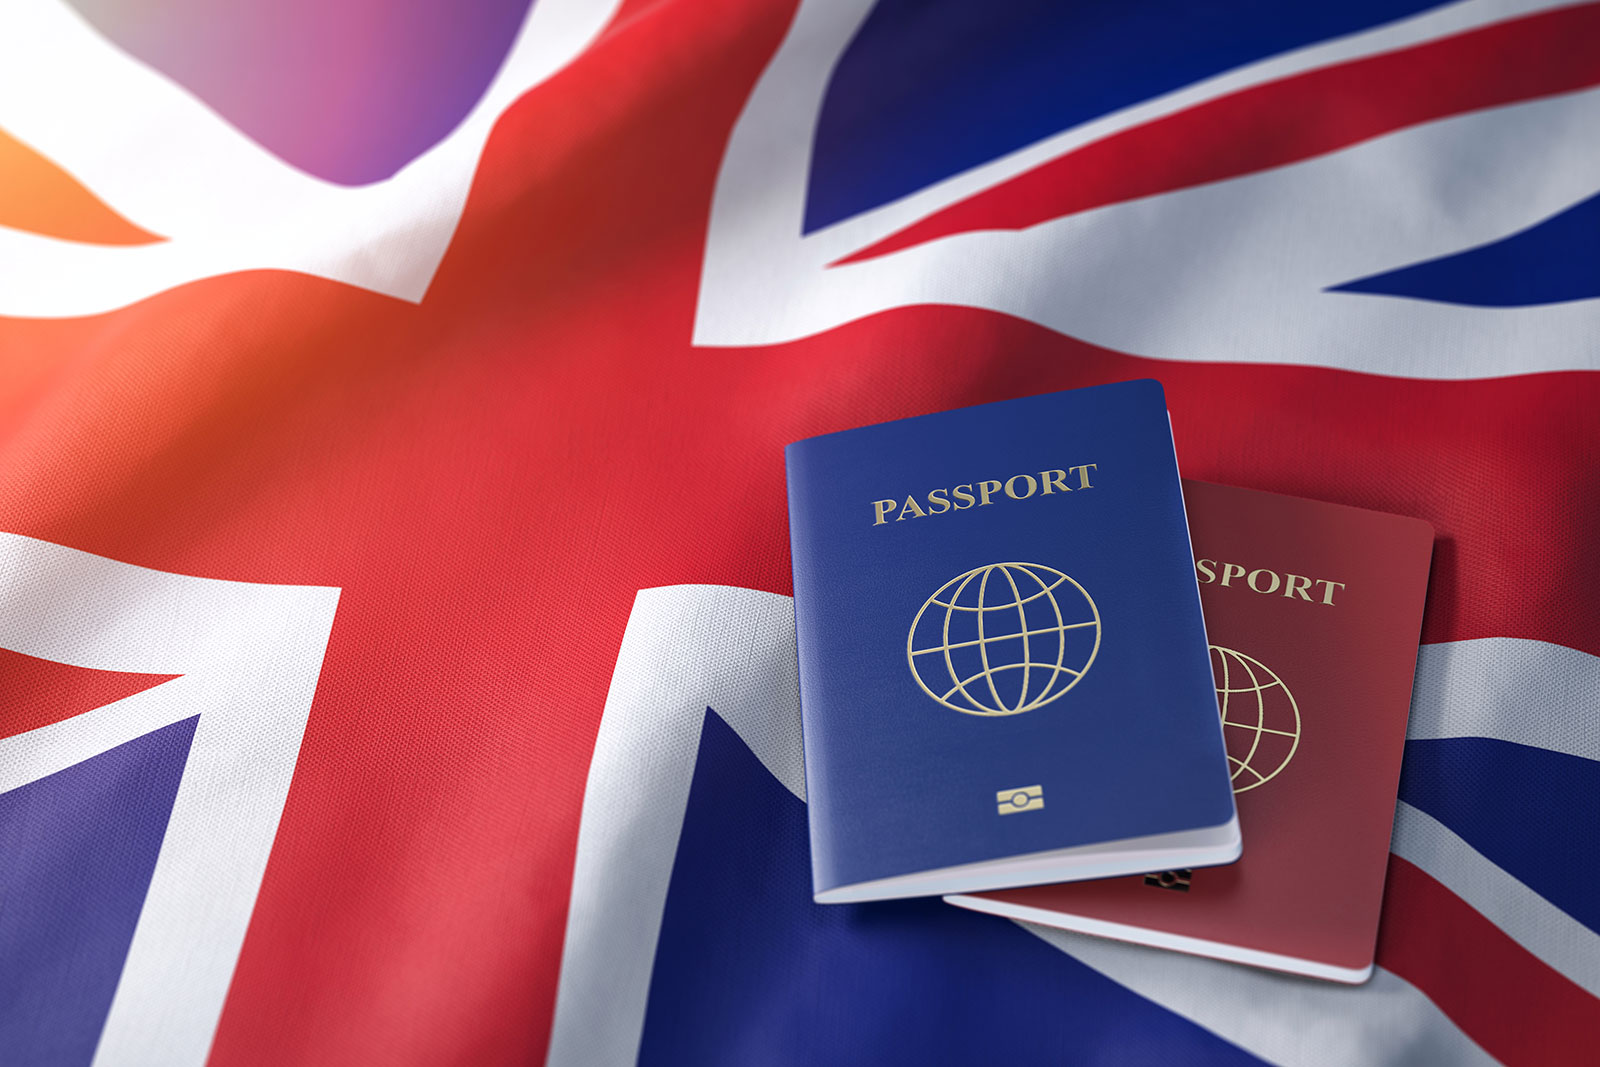 EU ID Cards no longer accepted as travel documents to strengthen UK borders